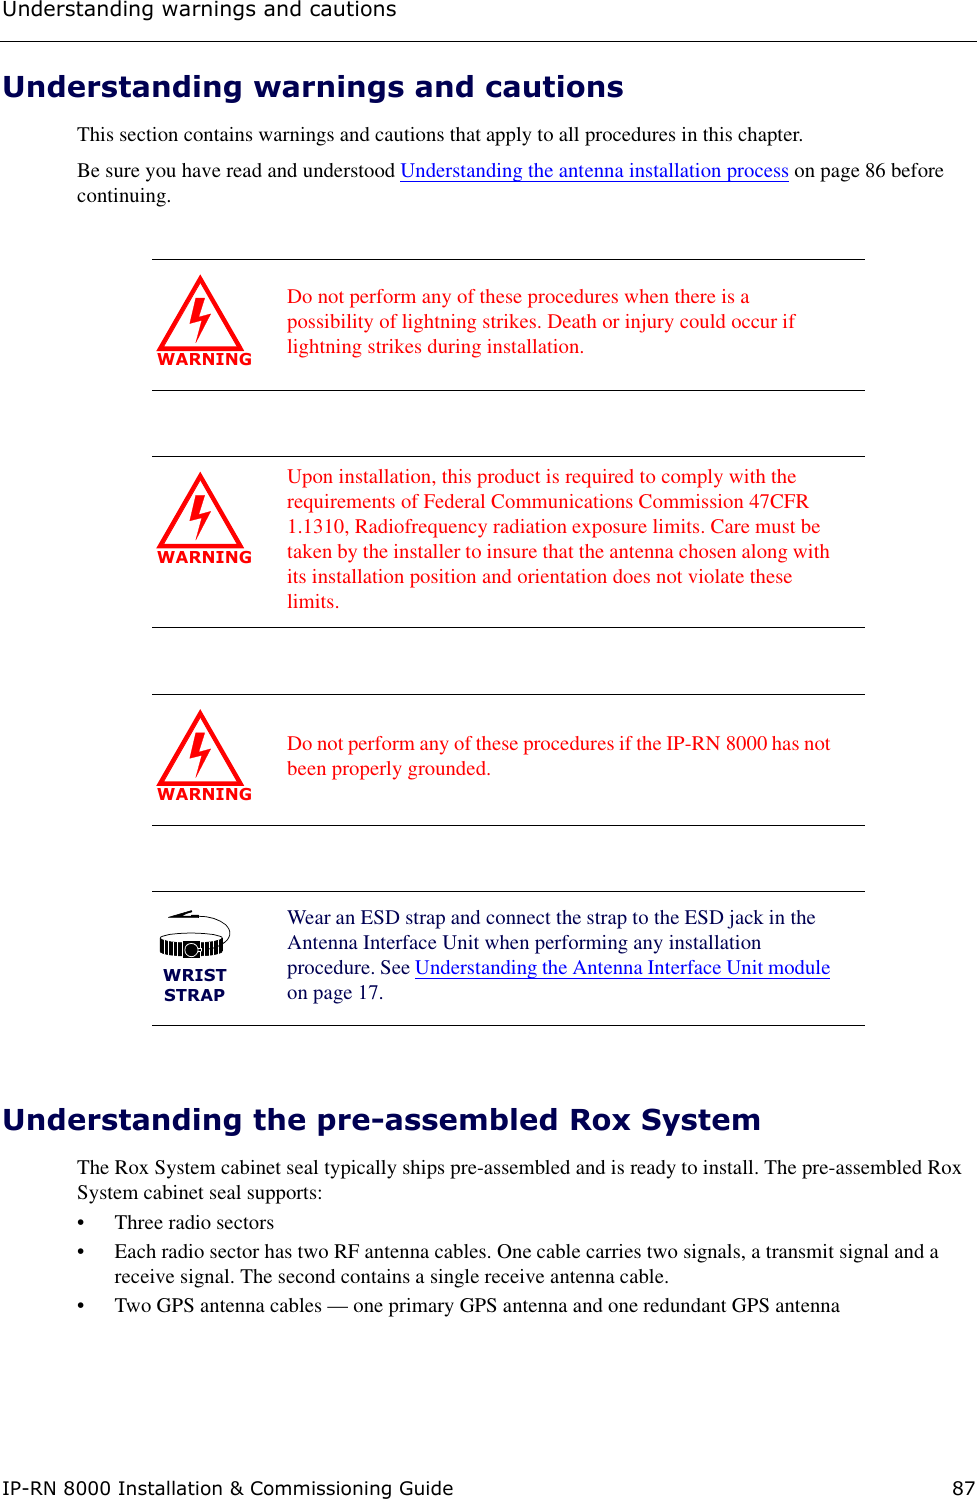 Understanding warnings and cautionsIP-RN 8000 Installation &amp; Commissioning Guide 87Understanding warnings and cautionsThis section contains warnings and cautions that apply to all procedures in this chapter. Be sure you have read and understood Understanding the antenna installation process on page 86 before continuing.Understanding the pre-assembled Rox SystemThe Rox System cabinet seal typically ships pre-assembled and is ready to install. The pre-assembled Rox System cabinet seal supports:• Three radio sectors• Each radio sector has two RF antenna cables. One cable carries two signals, a transmit signal and a receive signal. The second contains a single receive antenna cable.• Two GPS antenna cables — one primary GPS antenna and one redundant GPS antenna WARNINGDo not perform any of these procedures when there is a possibility of lightning strikes. Death or injury could occur if lightning strikes during installation.WARNINGUpon installation, this product is required to comply with the requirements of Federal Communications Commission 47CFR 1.1310, Radiofrequency radiation exposure limits. Care must be taken by the installer to insure that the antenna chosen along with its installation position and orientation does not violate these limits.WARNINGDo not perform any of these procedures if the IP-RN 8000 has not been properly grounded. WRISTSTRAPWear an ESD strap and connect the strap to the ESD jack in the Antenna Interface Unit when performing any installation procedure. See Understanding the Antenna Interface Unit module on page 17.